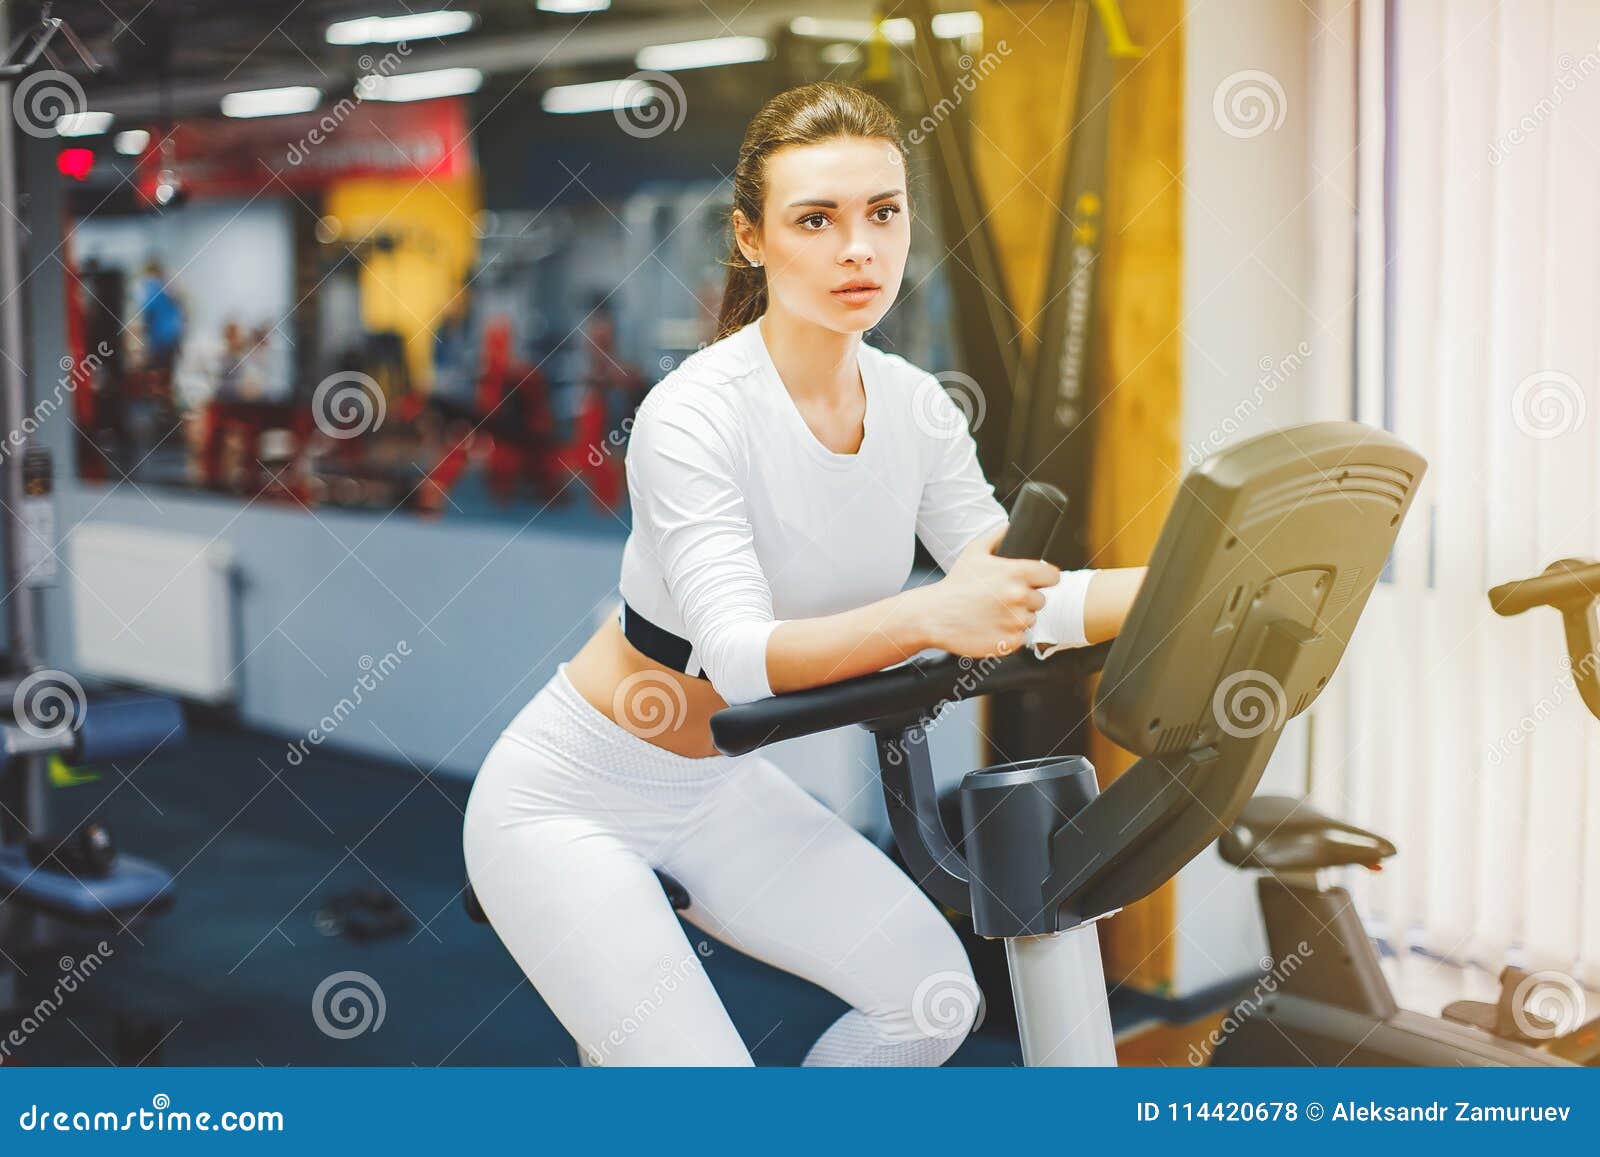 Woman riding an exercise bike in gym. Indoor cycling 